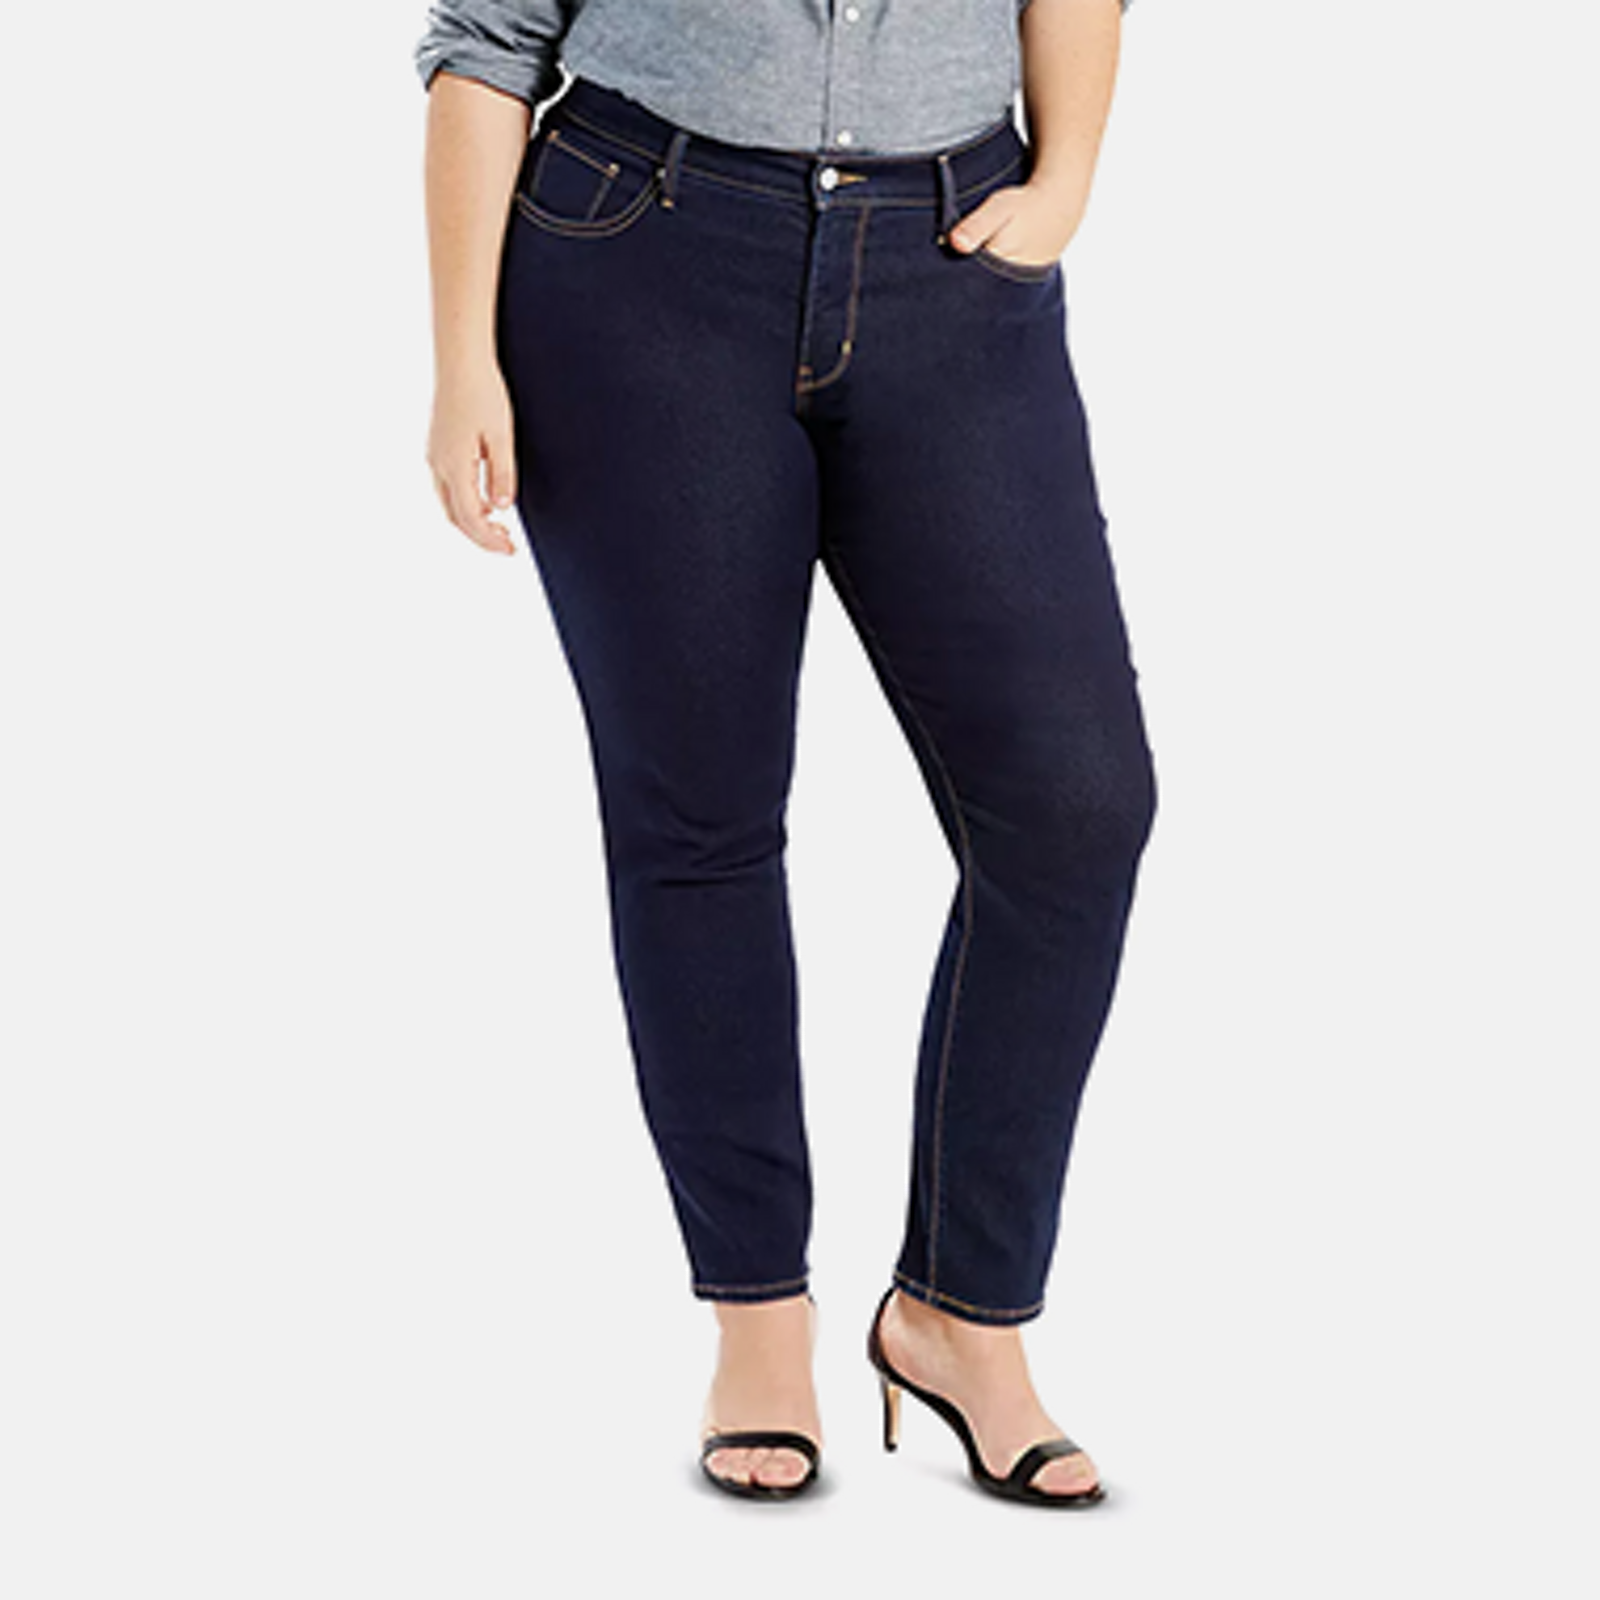 Free People Shayla Bootcut Jeans - Macy's